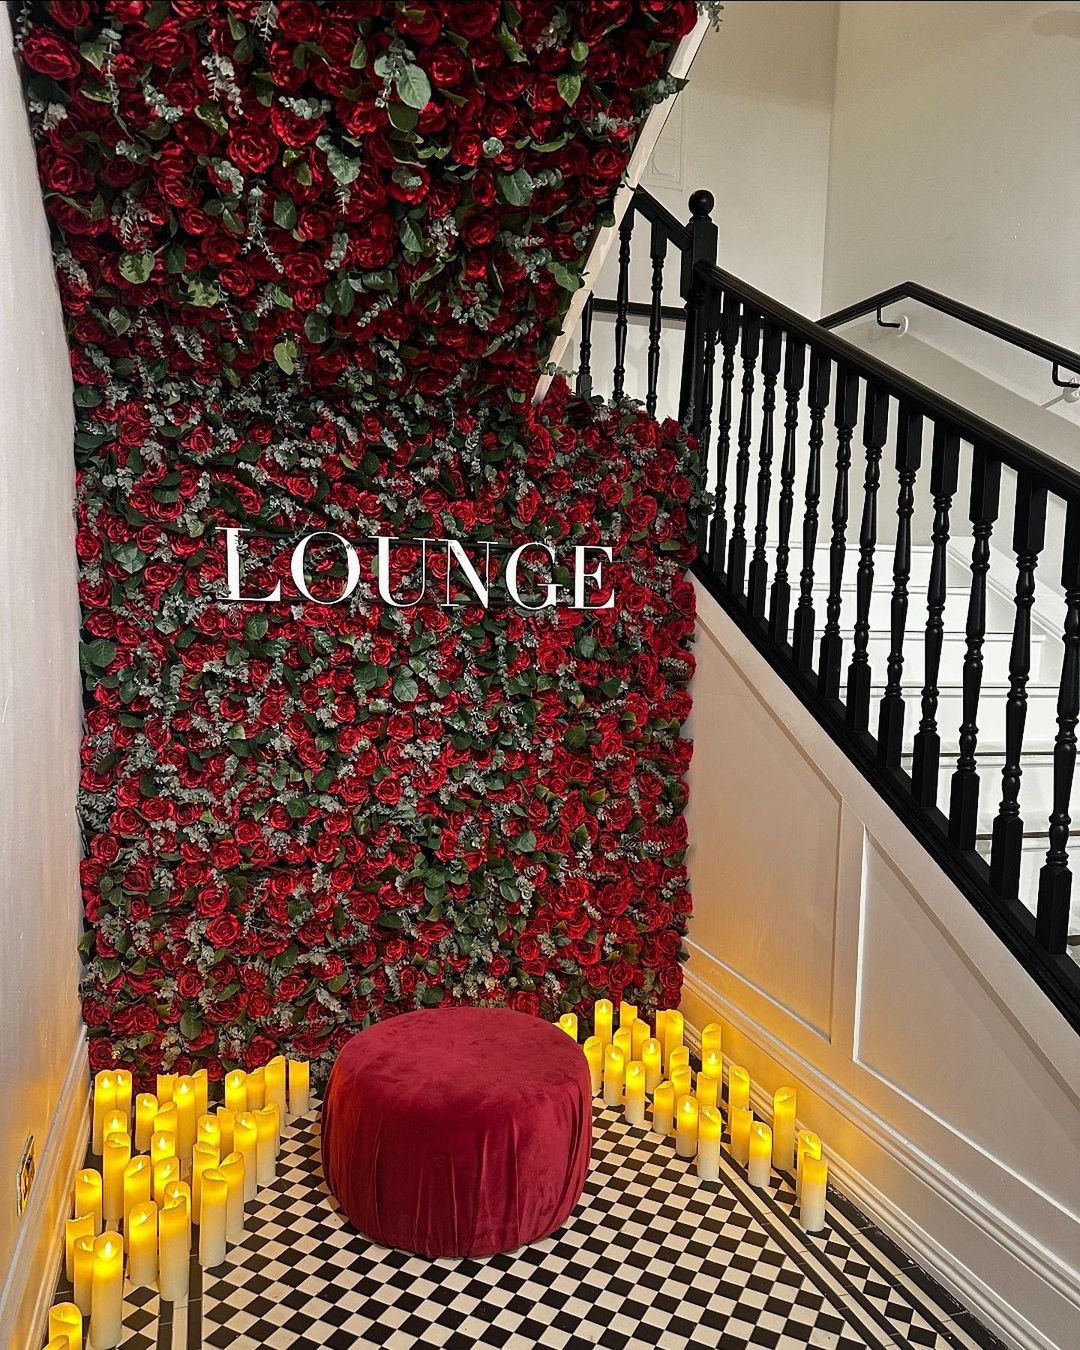 Lounge Underwear Comes To King Street - King Street Manchester